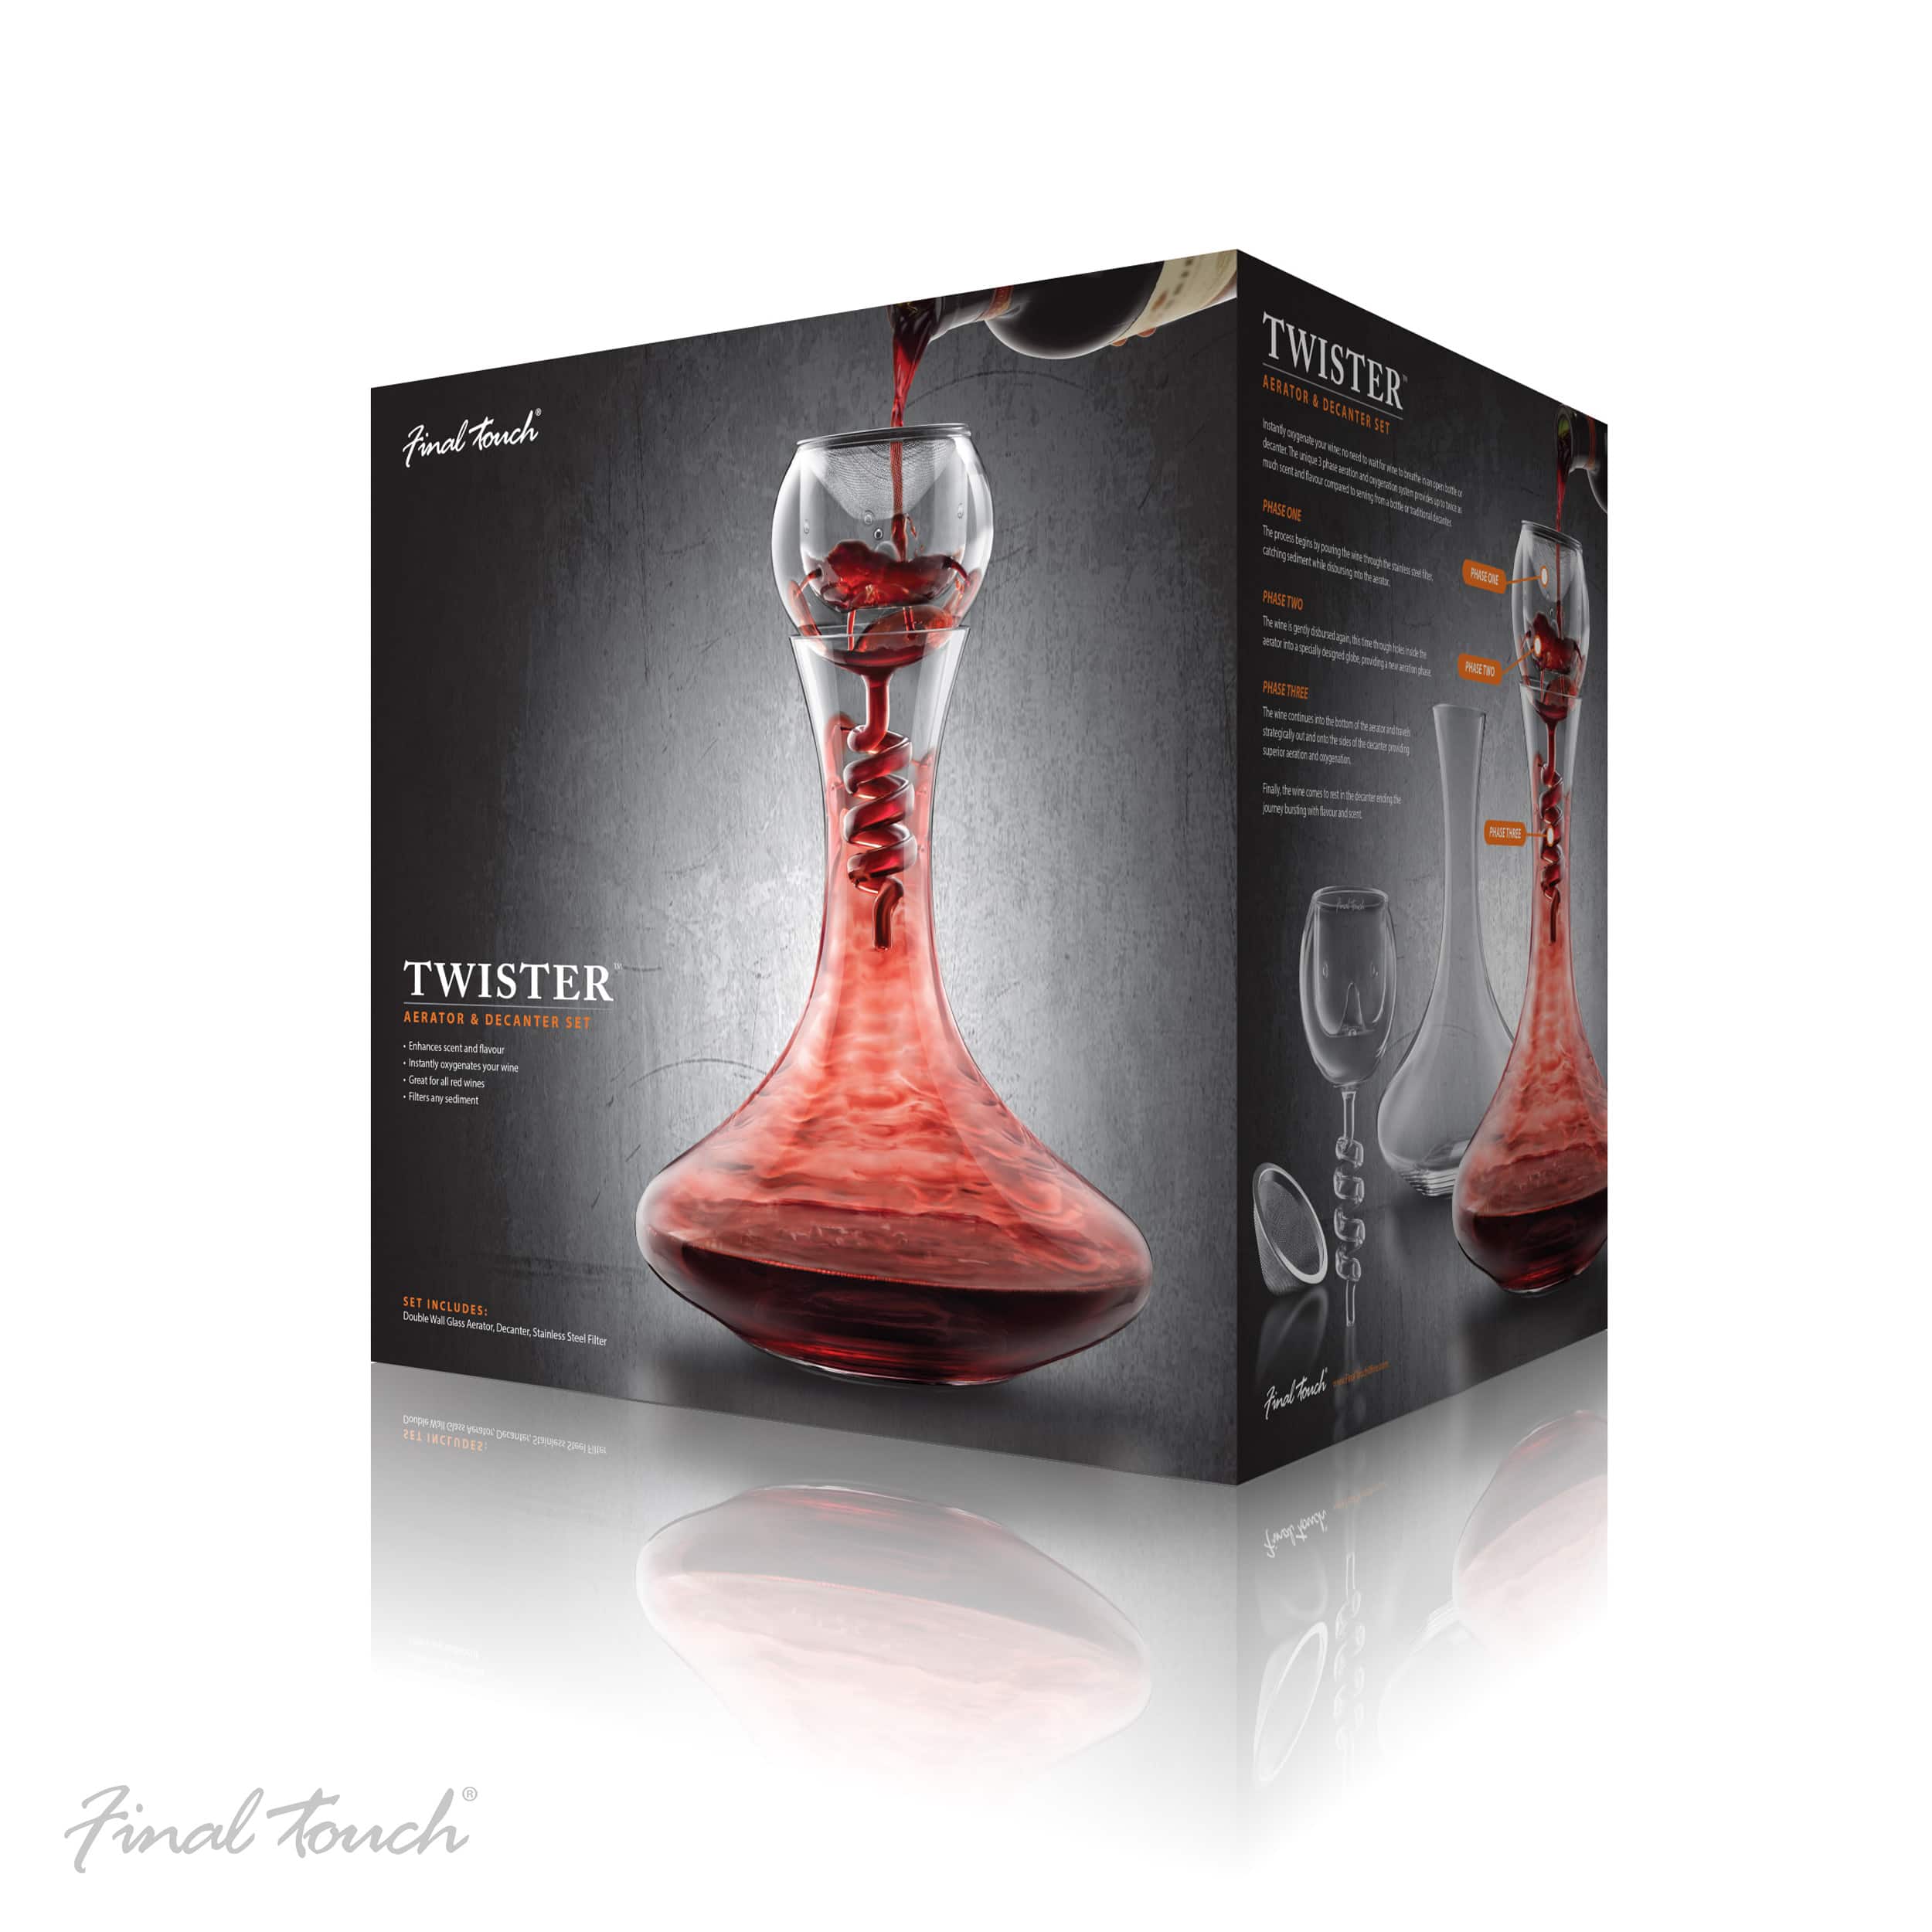 Final Touch Twister Wine Aerator Decanter -4088